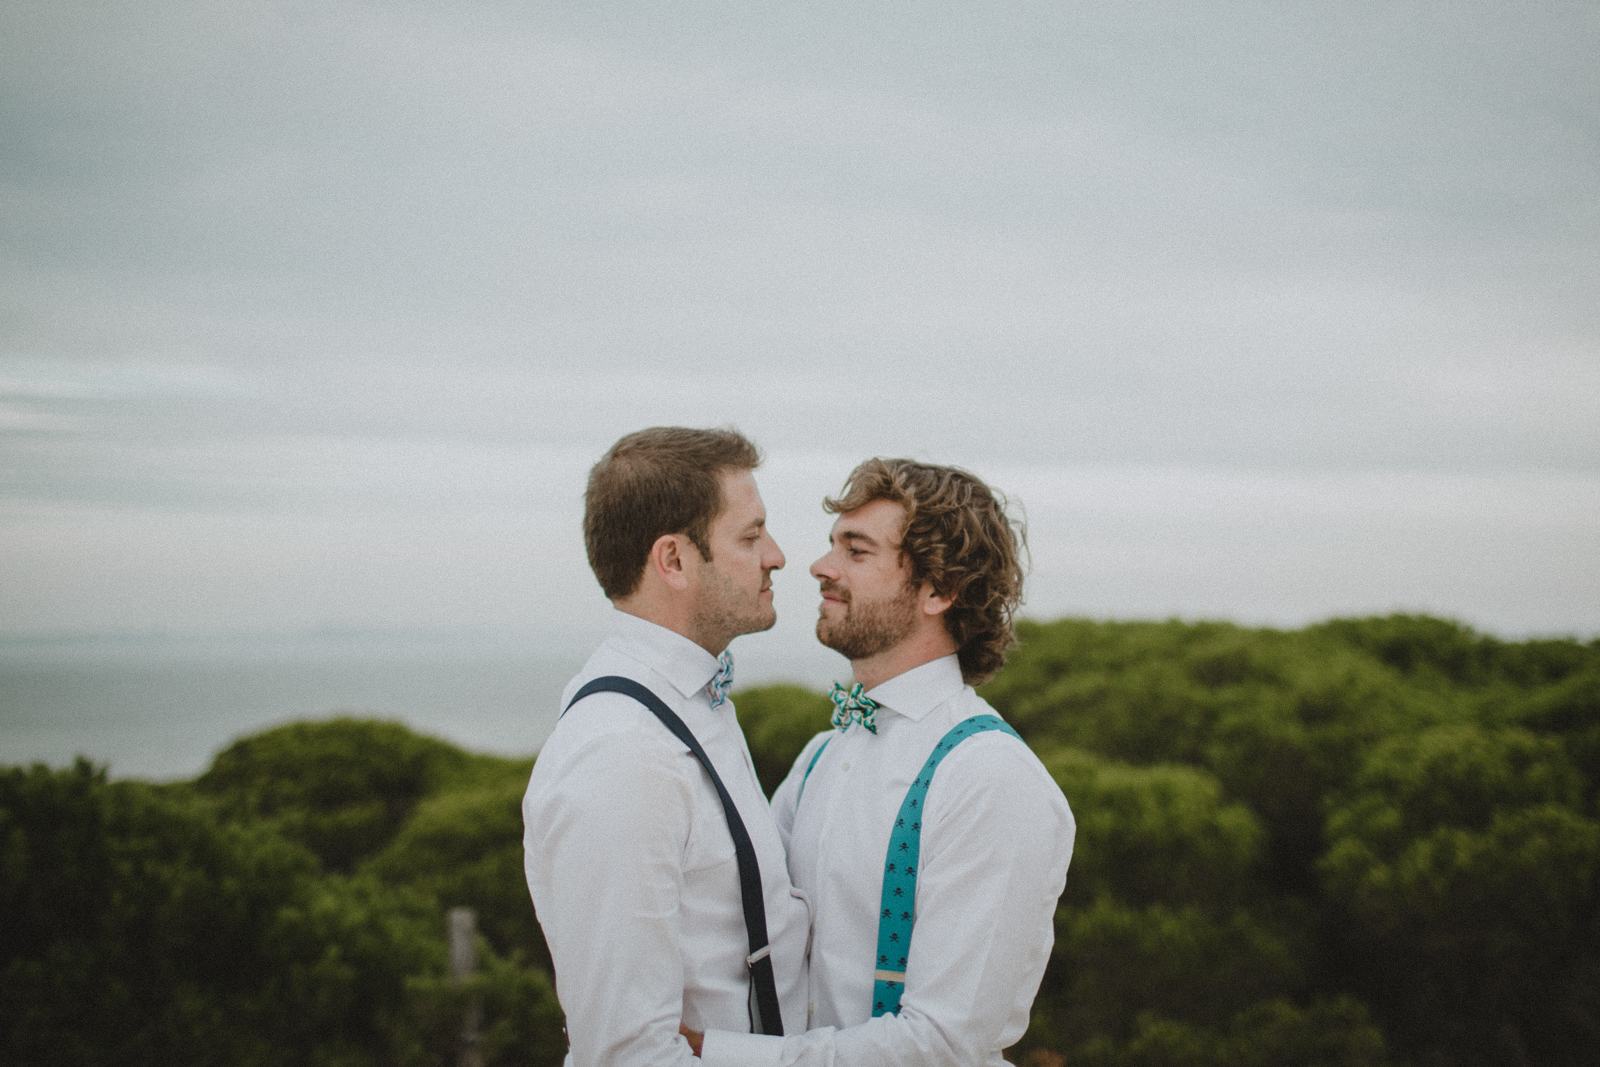 Male Gay Wedding Couples Images, Stock Photos Vectors